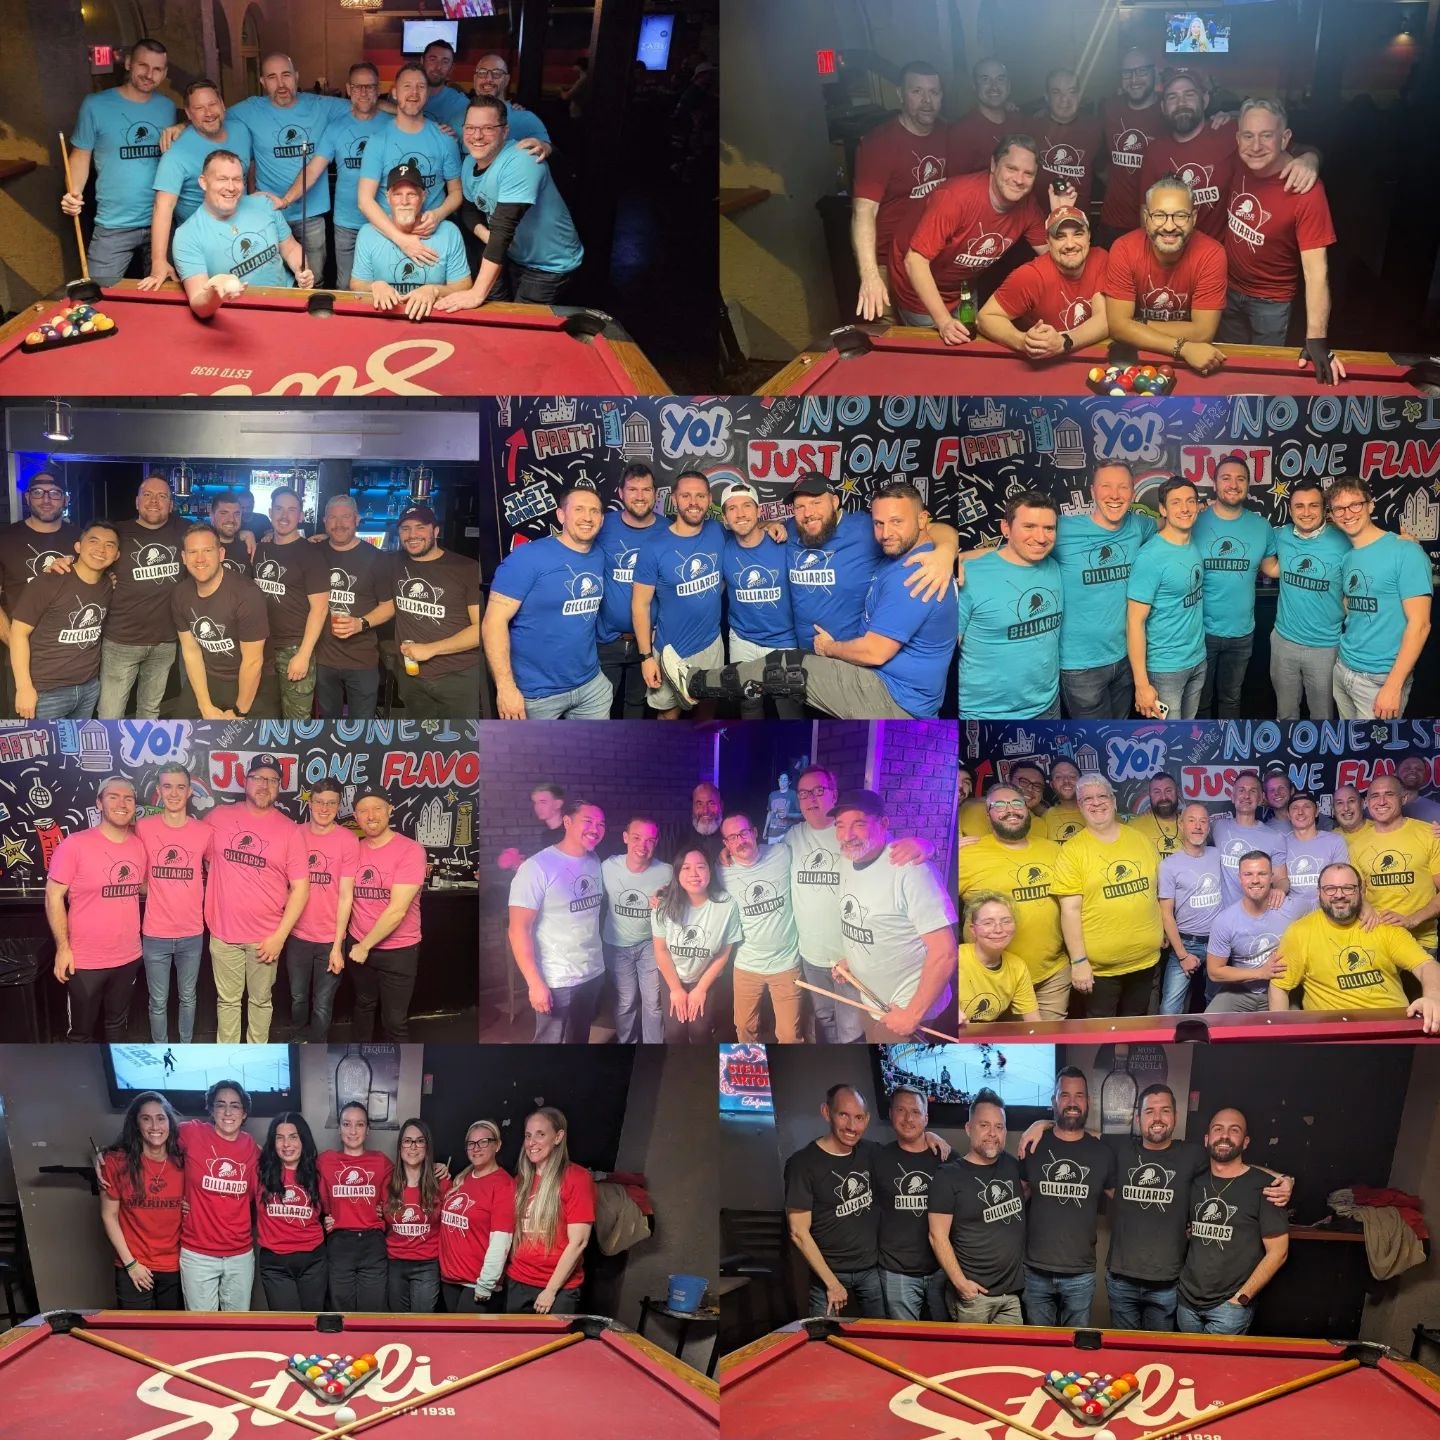 Opening Night of our inaugural @outloudsports Philly Billiards League! 13 teams and 115 players strong 🎱 #outloudsports #queersports #queerphilly #billiards